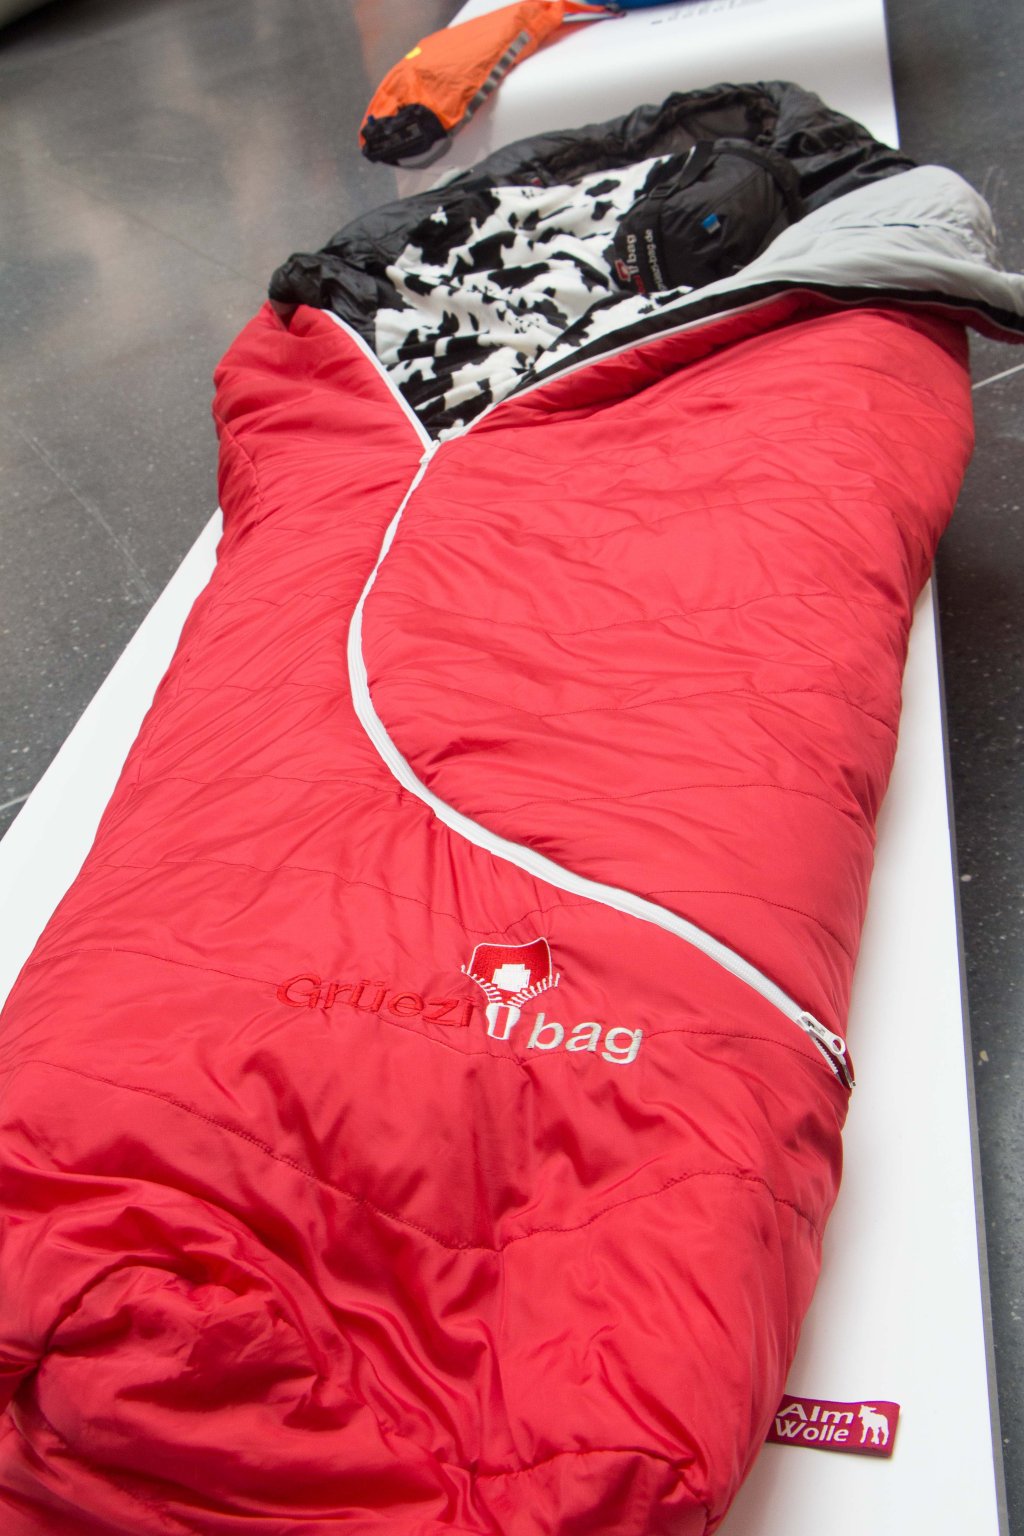 The sleeping bag is filled with alpine wool and offers an alternative to down